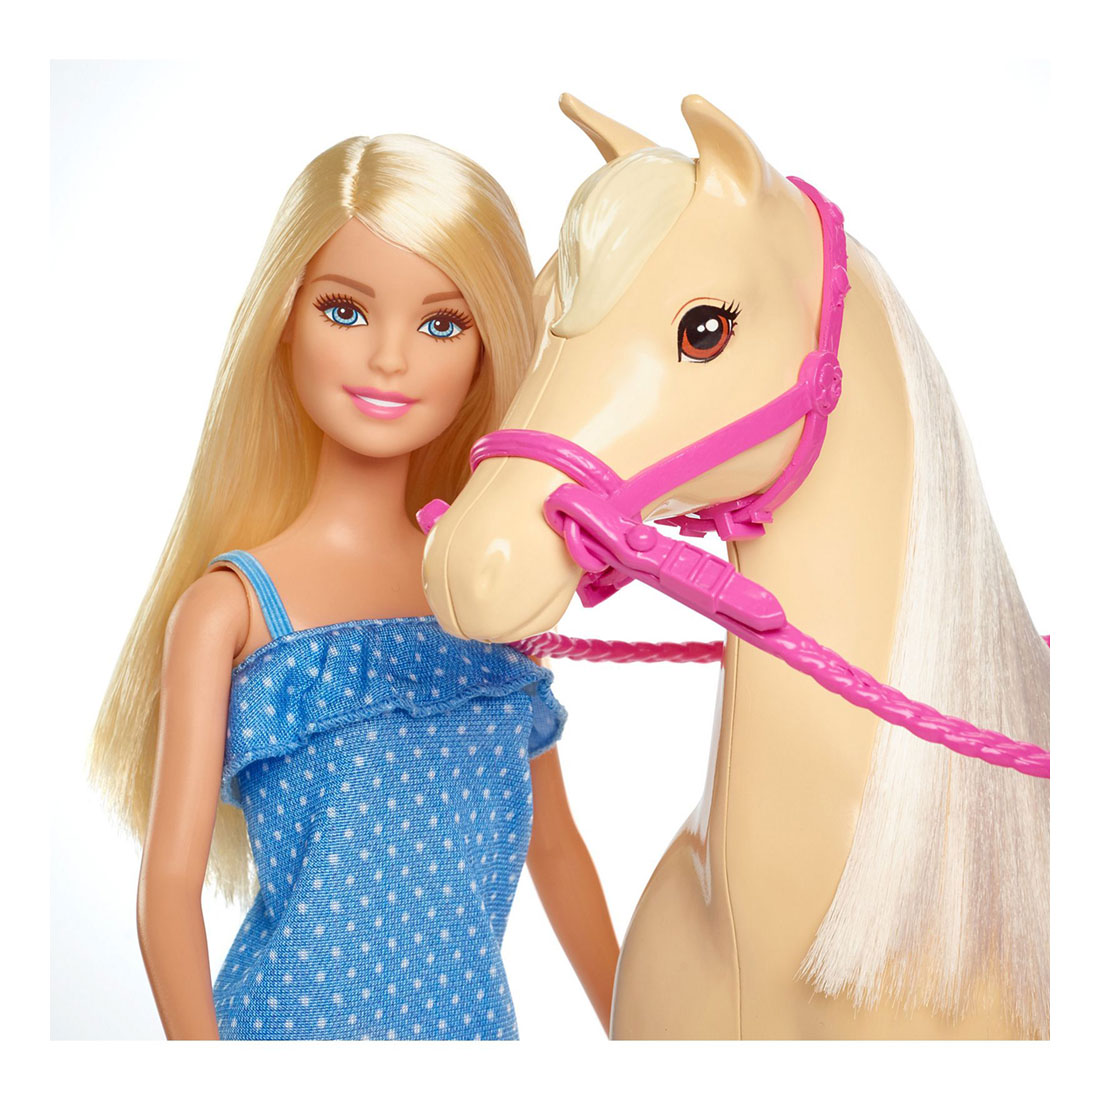 Barbie Basic and her Horse